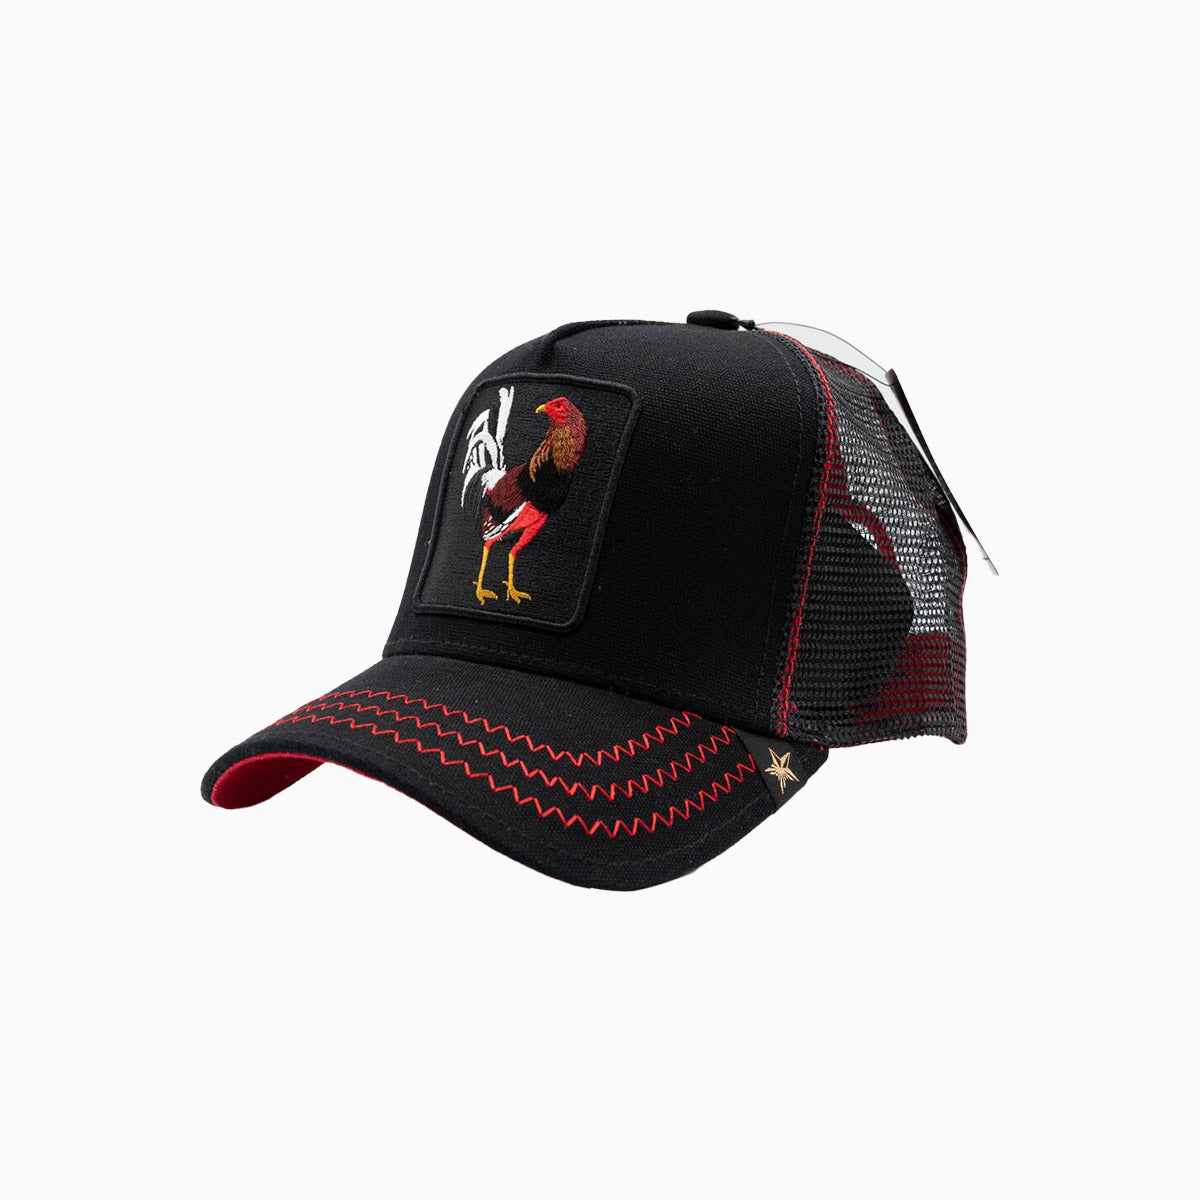 gold-star-hats-the-rooster-black-red-trucker-hat-gs1013-black